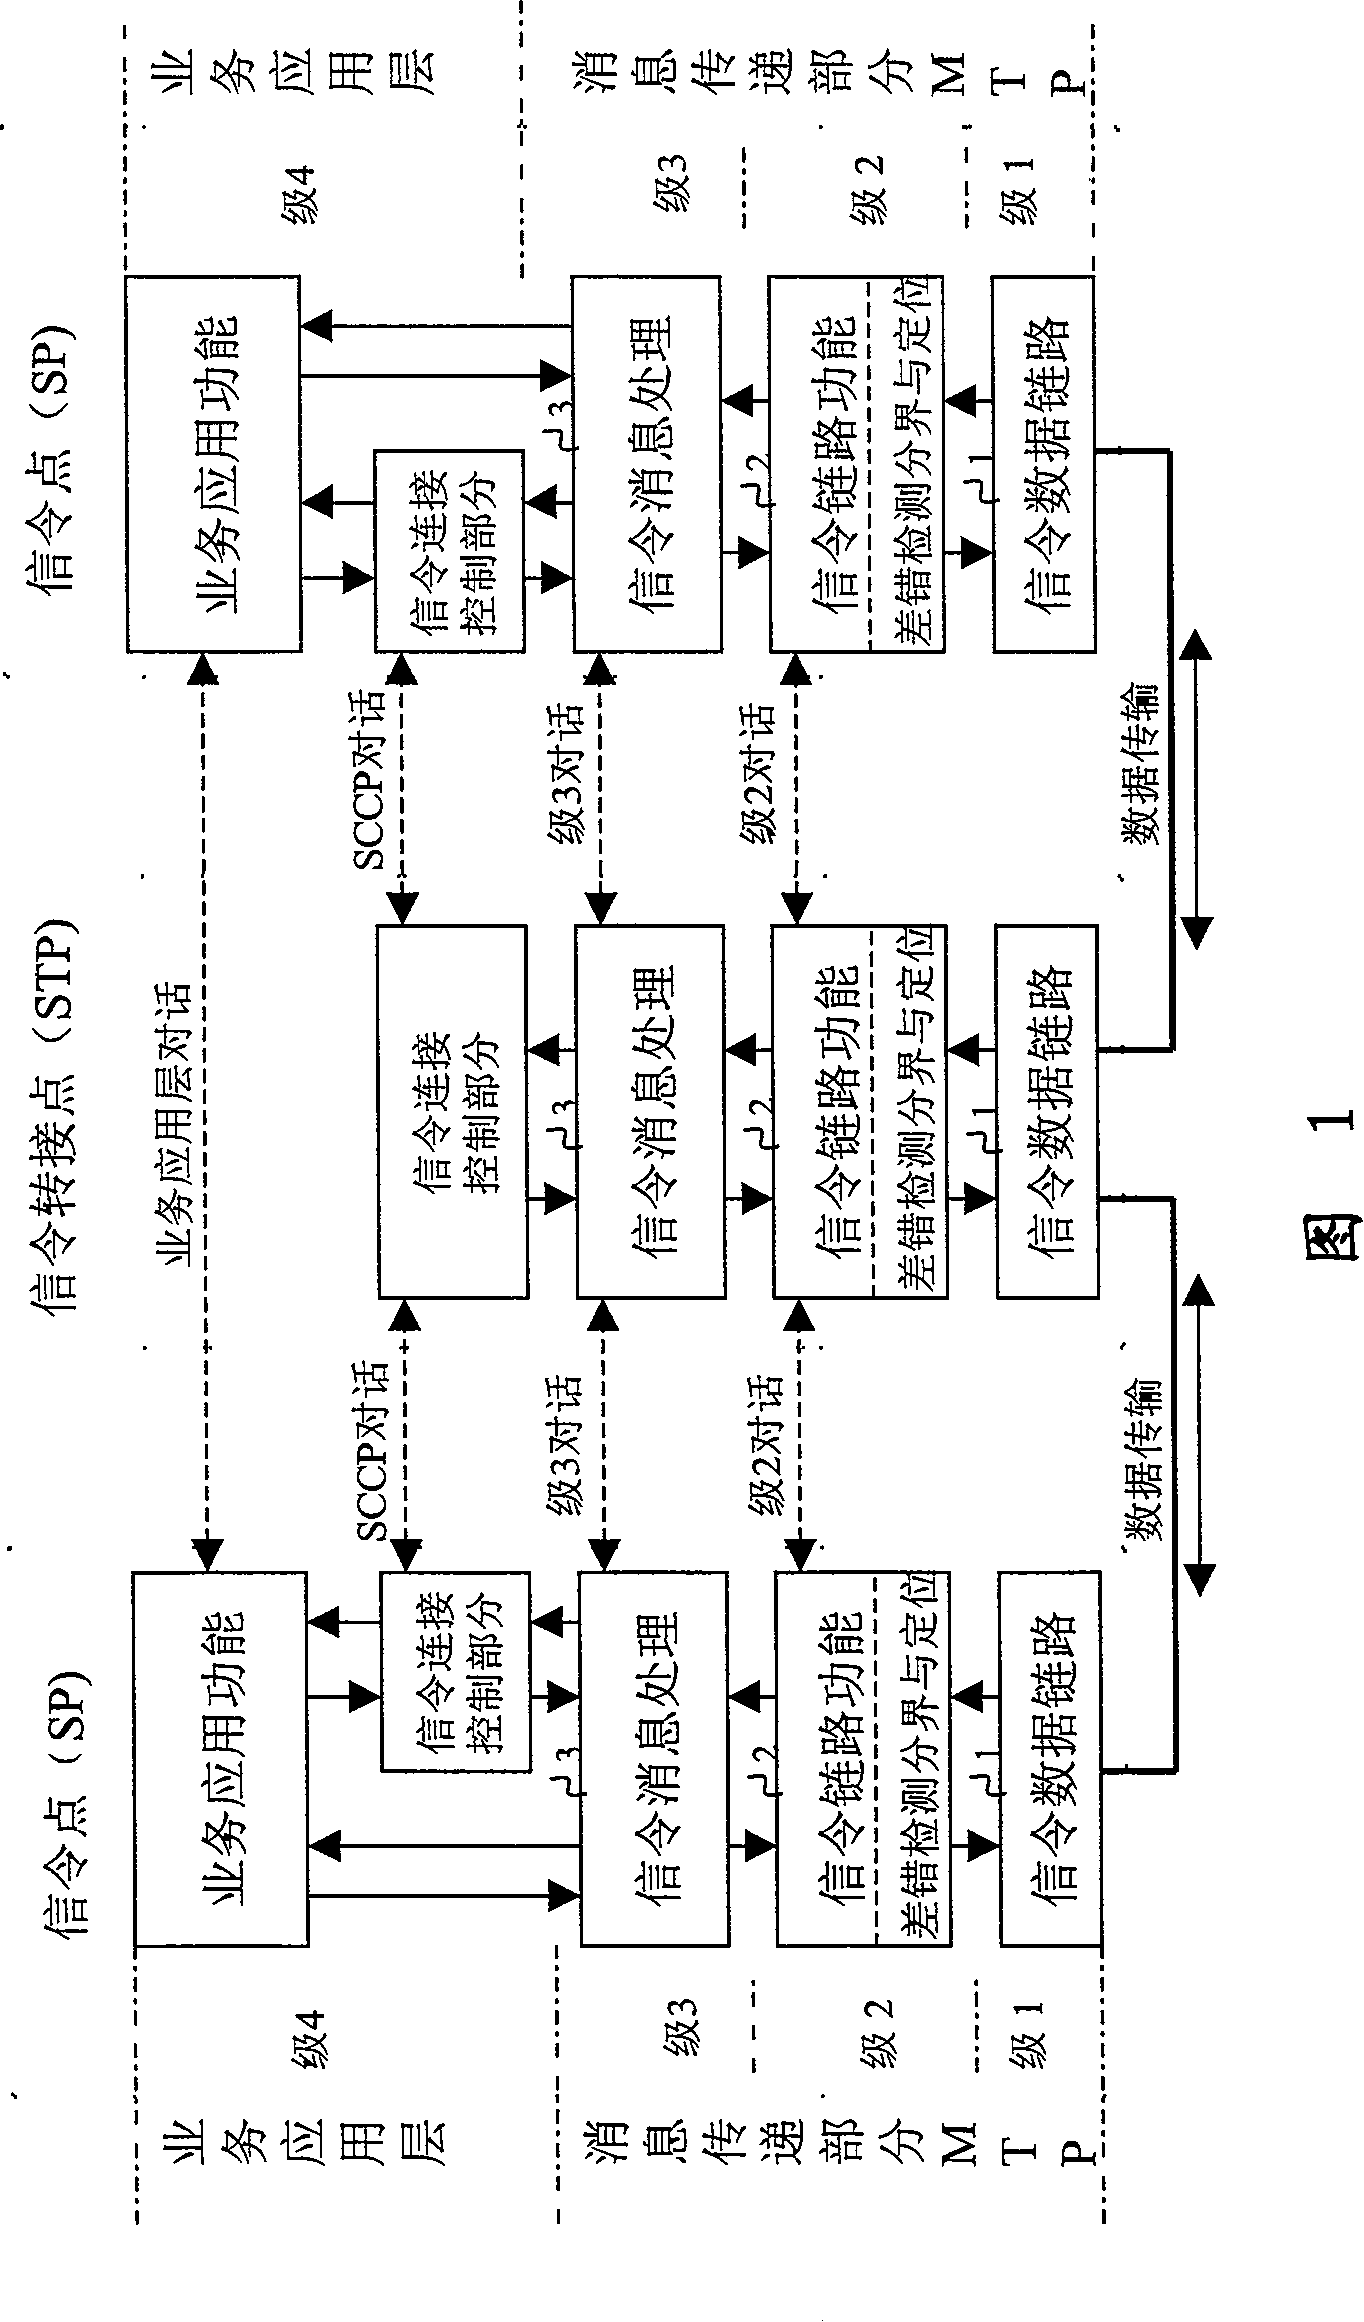 Signaling data identifying and processing method in signaling 7 link functional layer and equipment thereof